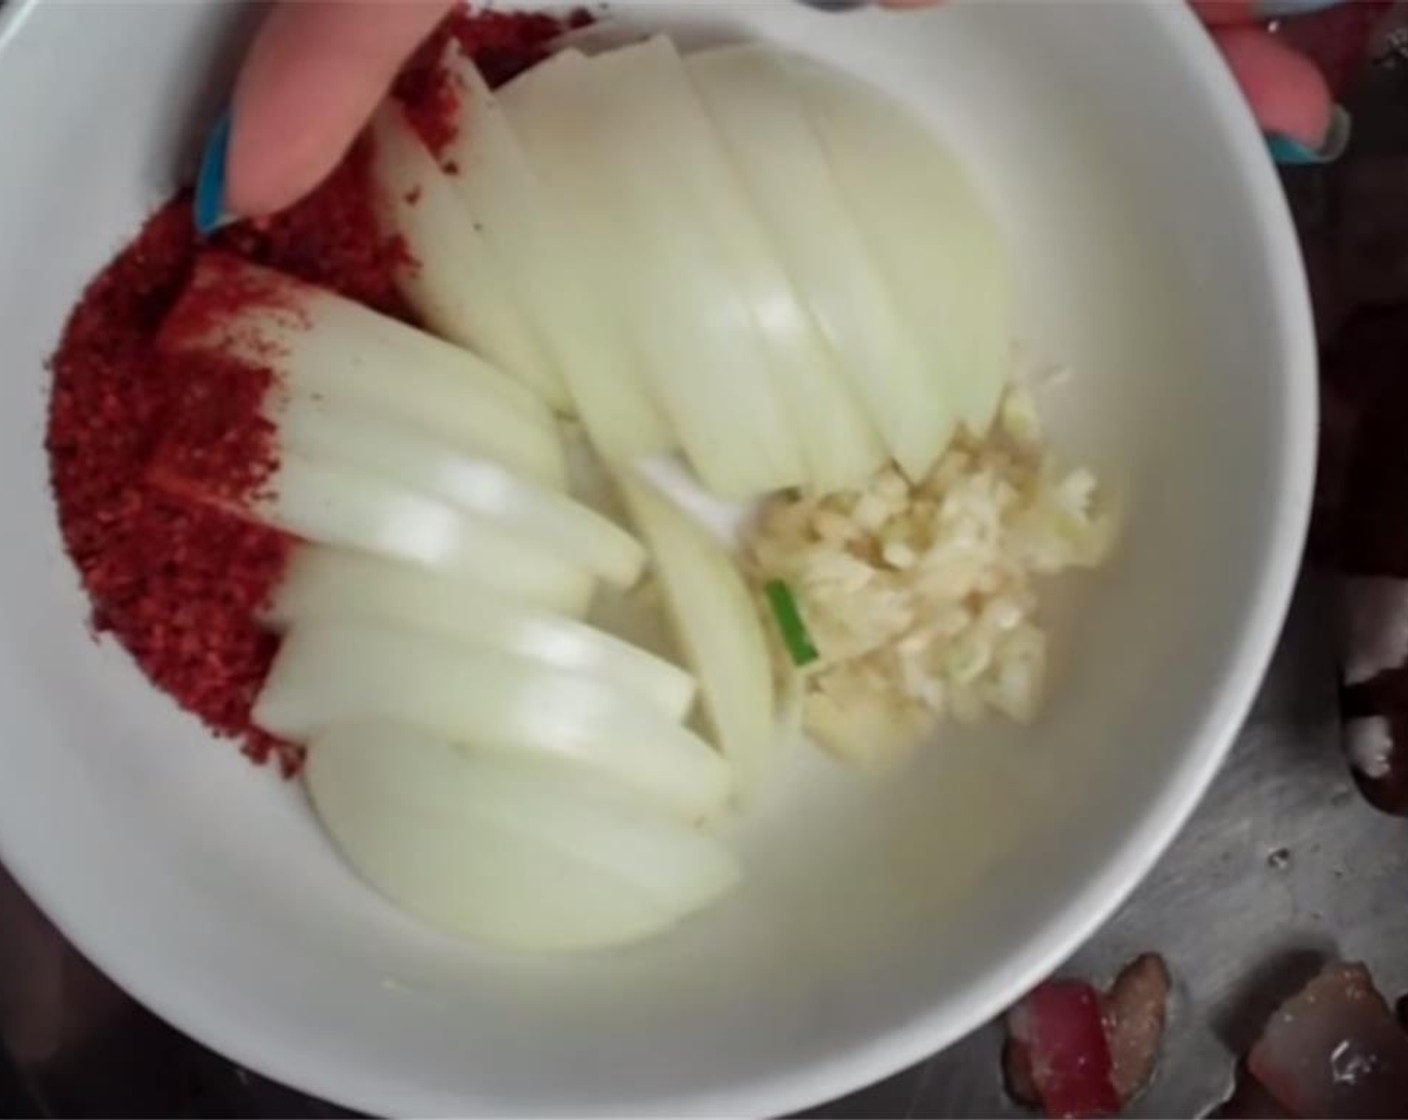 step 3 Stir in the Onion (1/2), Garlic (2 cloves), and Korean Chili Flakes (1/2 Tbsp) until softened a bit.